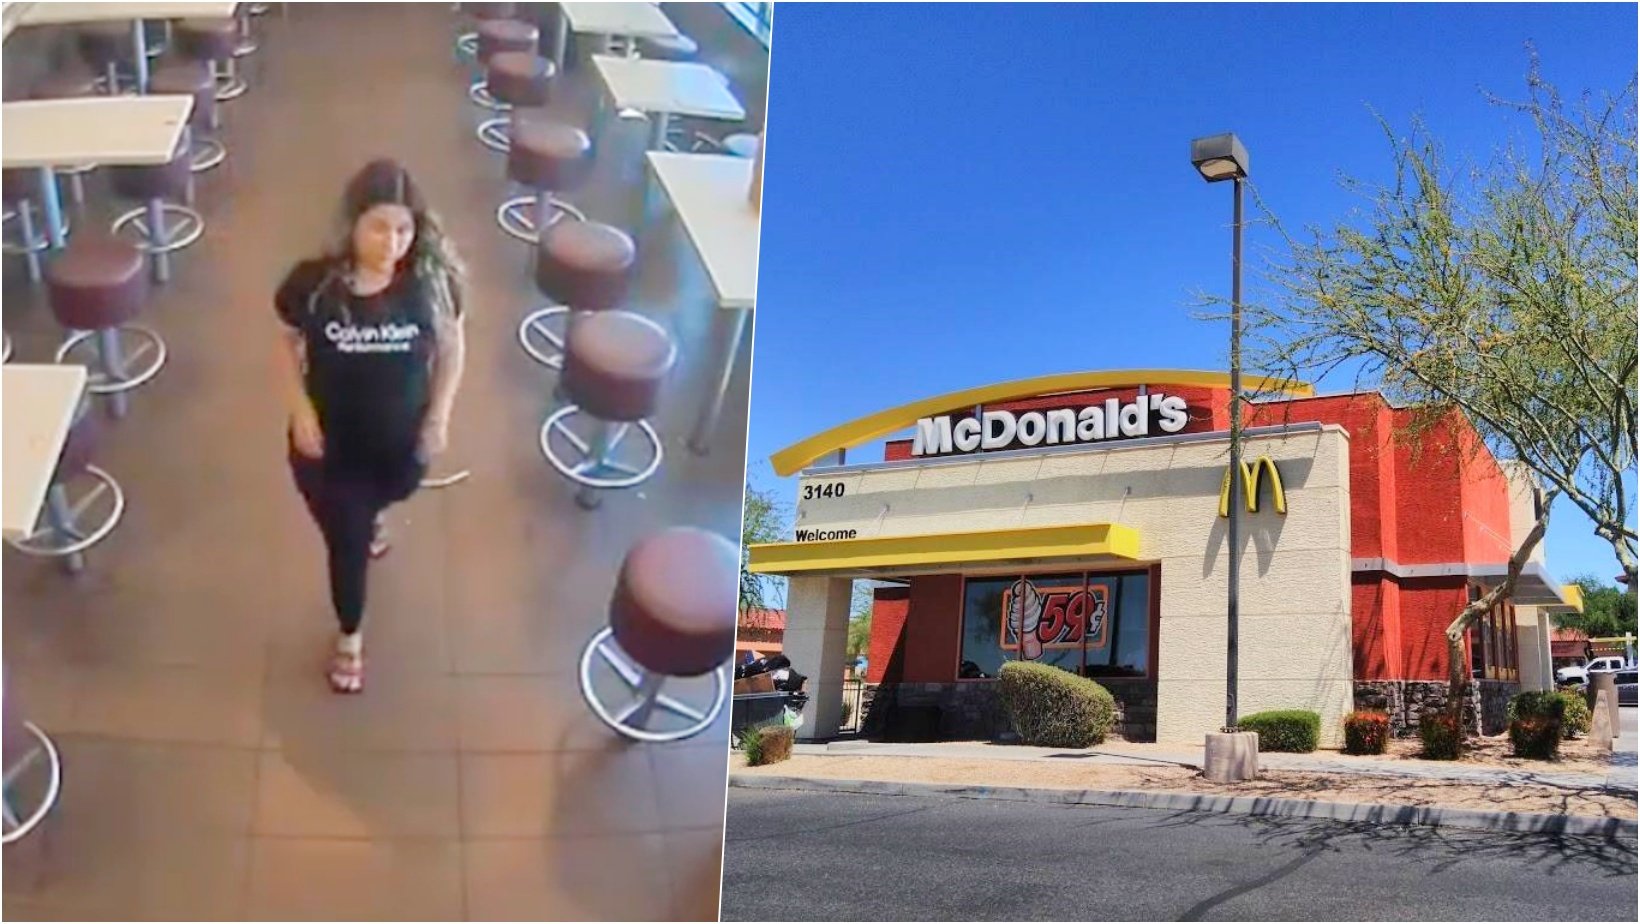 6 facebook cover 6.jpg?resize=1200,630 - Newborn Was FOUND DEAD Inside McDonald’s Bathroom In West Phoenix With Authorities Searching For A Woman